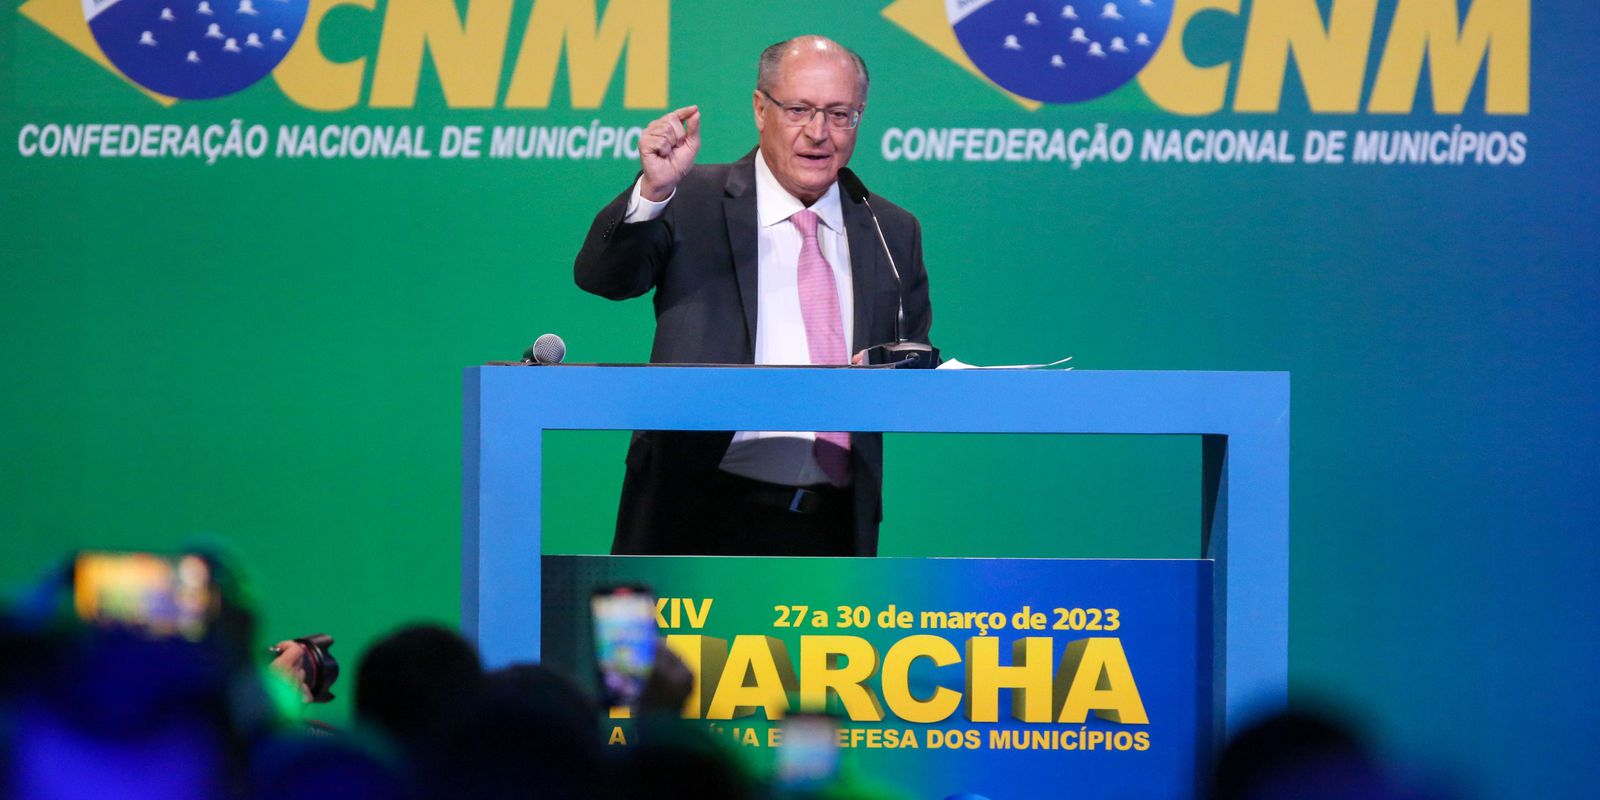 Alckmin defends tax reform and says that “our model is chaotic”